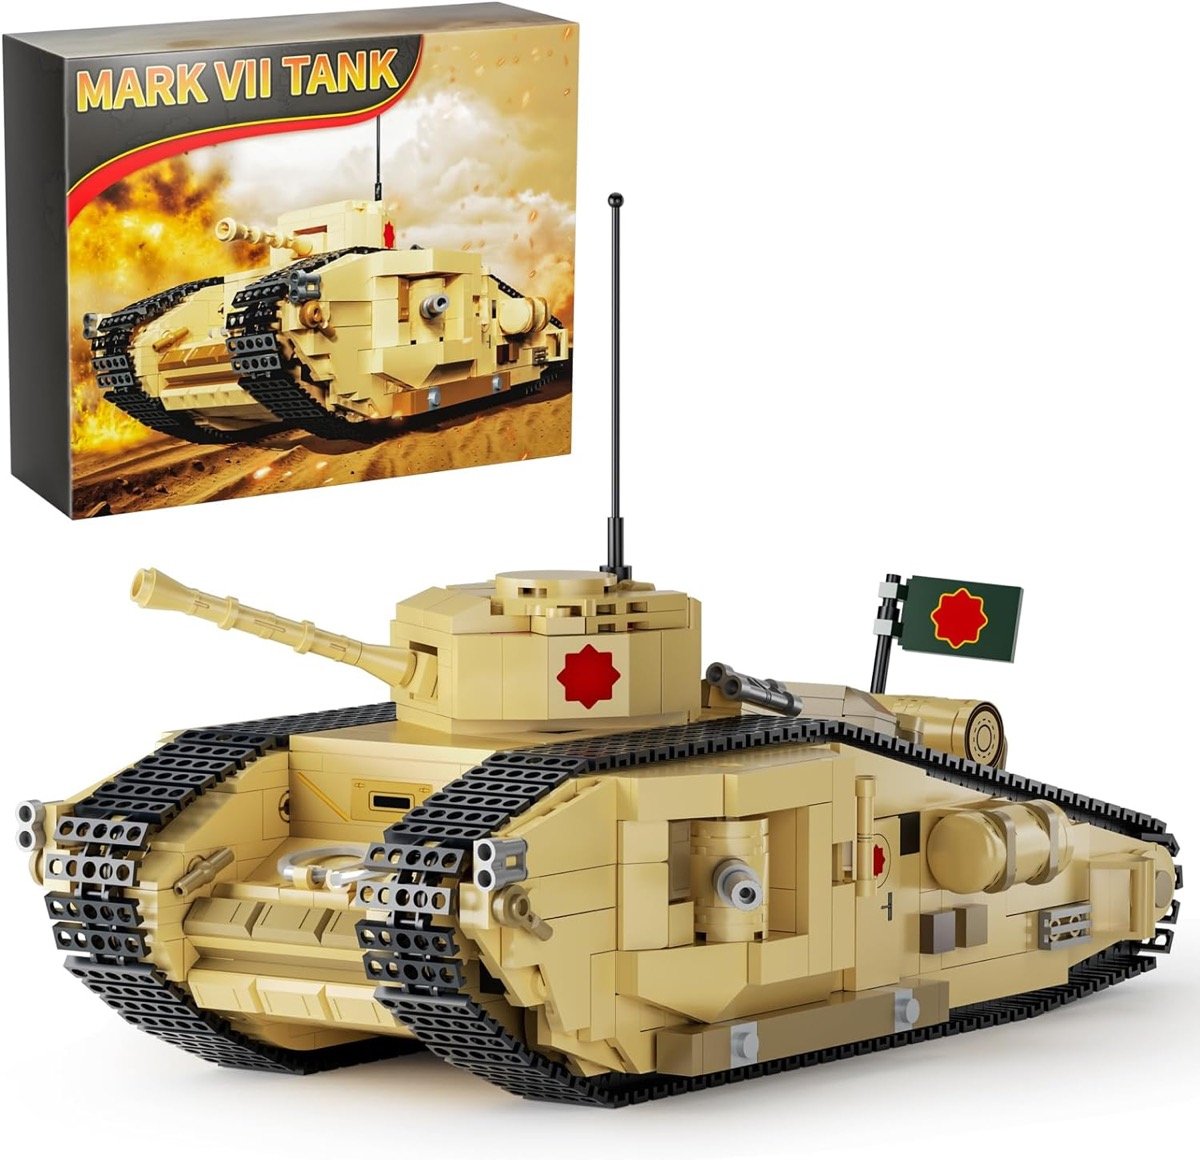 A LEGO model of a tank from "Indiana Jones: The Last Crusade" 